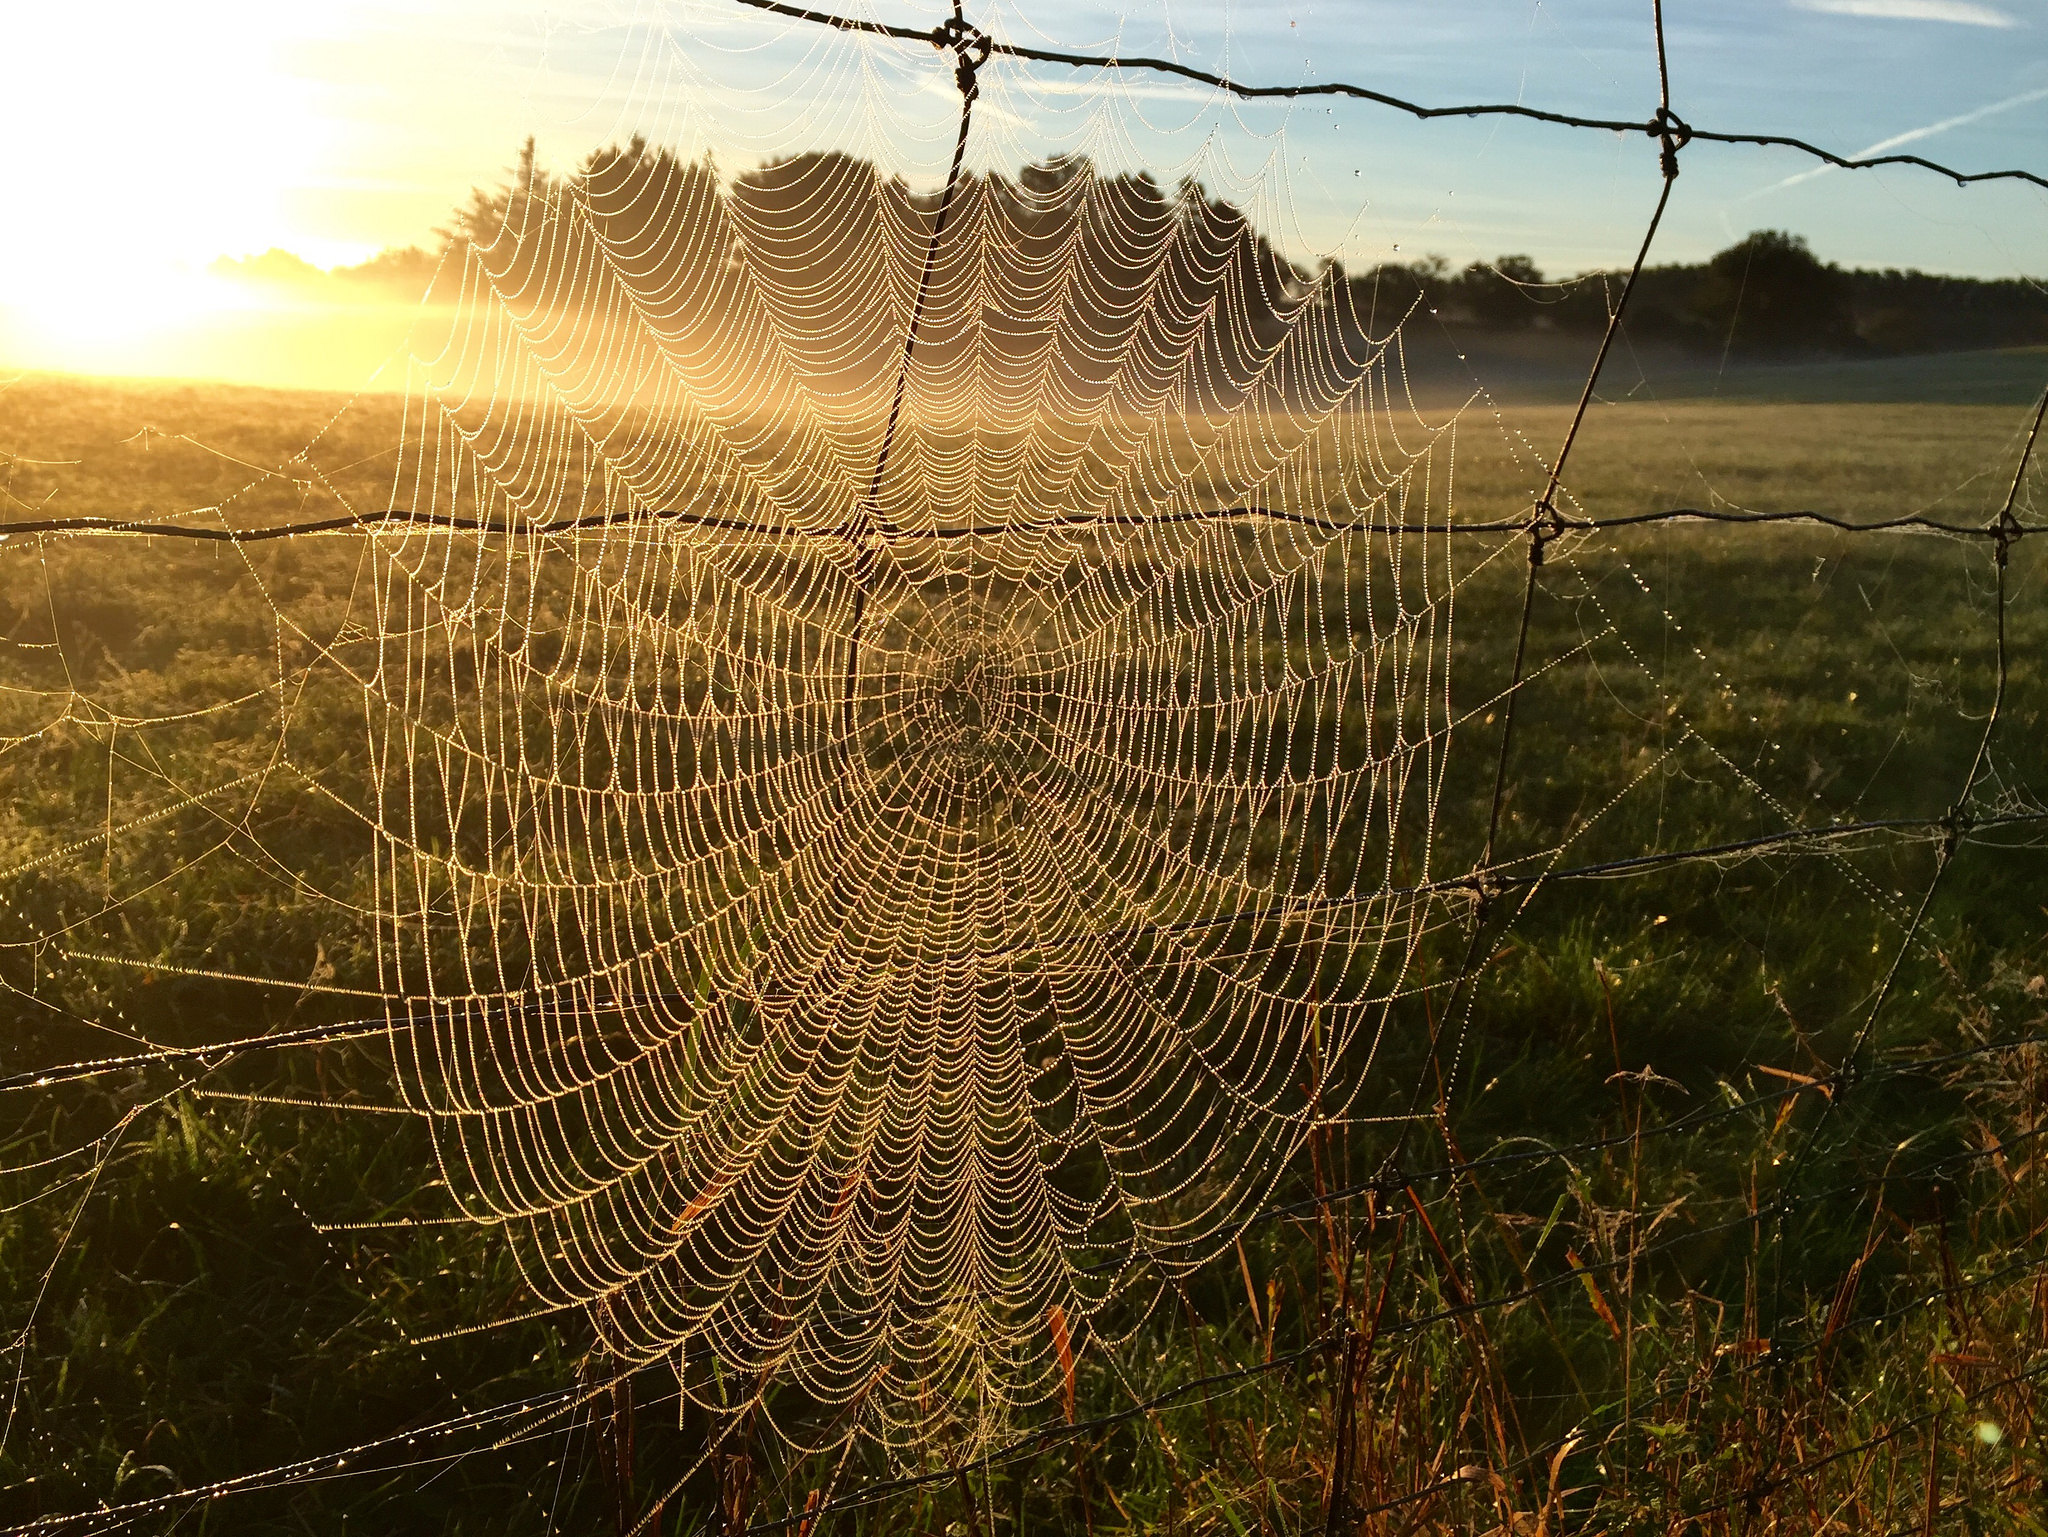 A spiderweb on a fence at sunrise, published as part of 